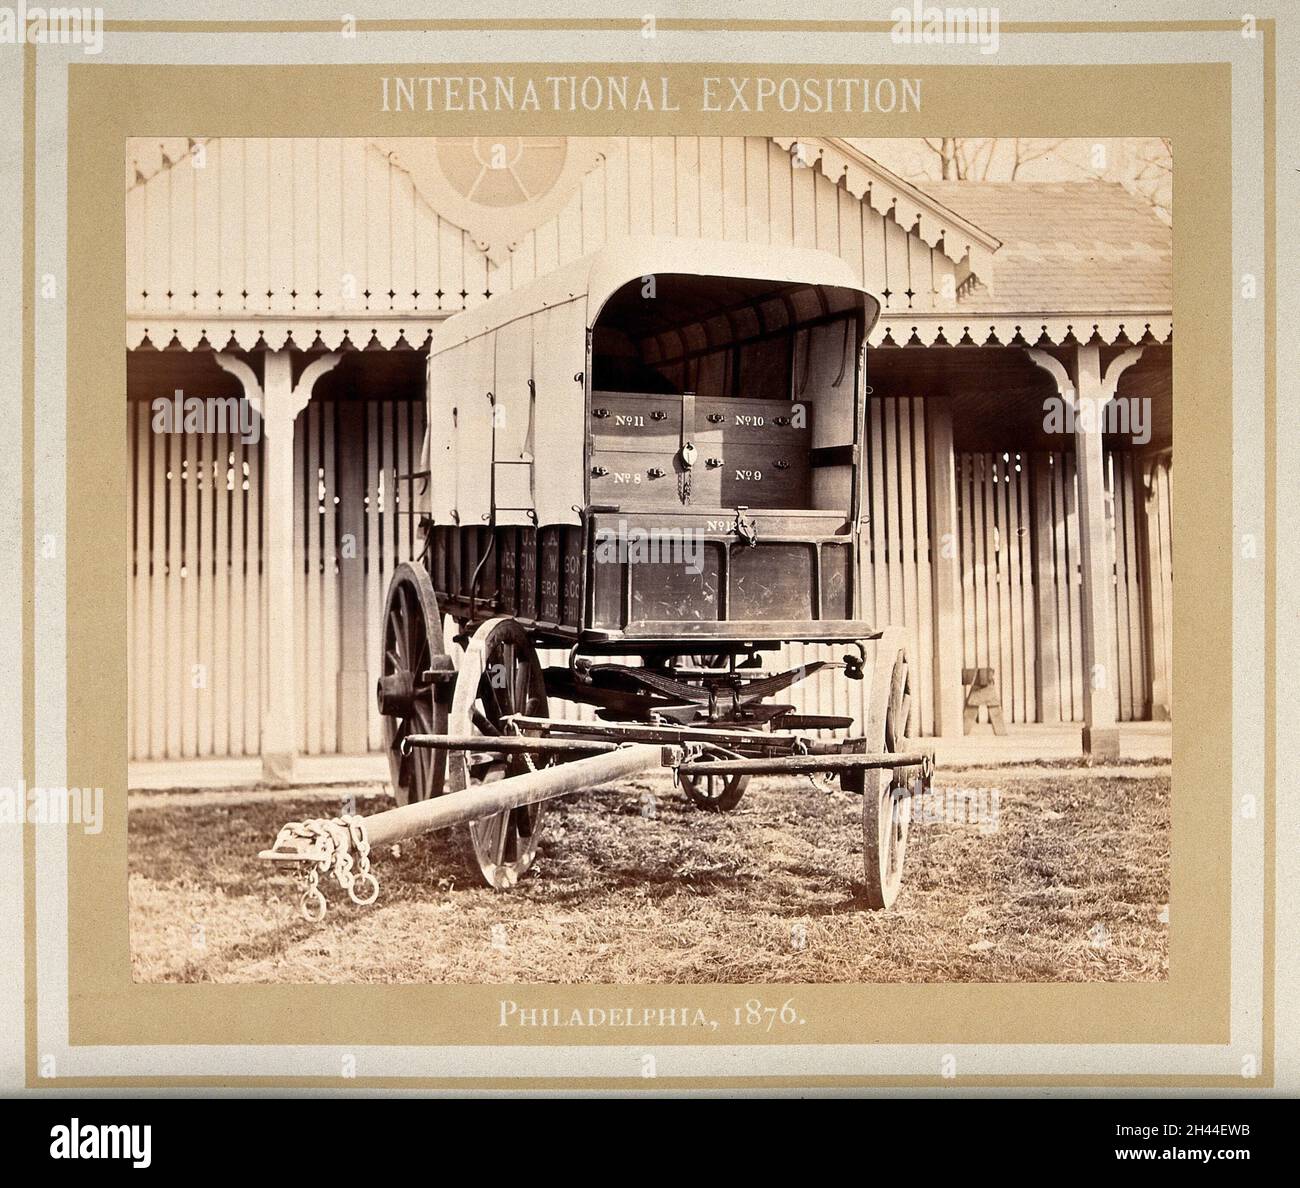 Philadelphia International Exposition, 1876: American Civil War medicine wagon produced by T. Morris Perot and Company. Photograph, 1876. Stock Photo